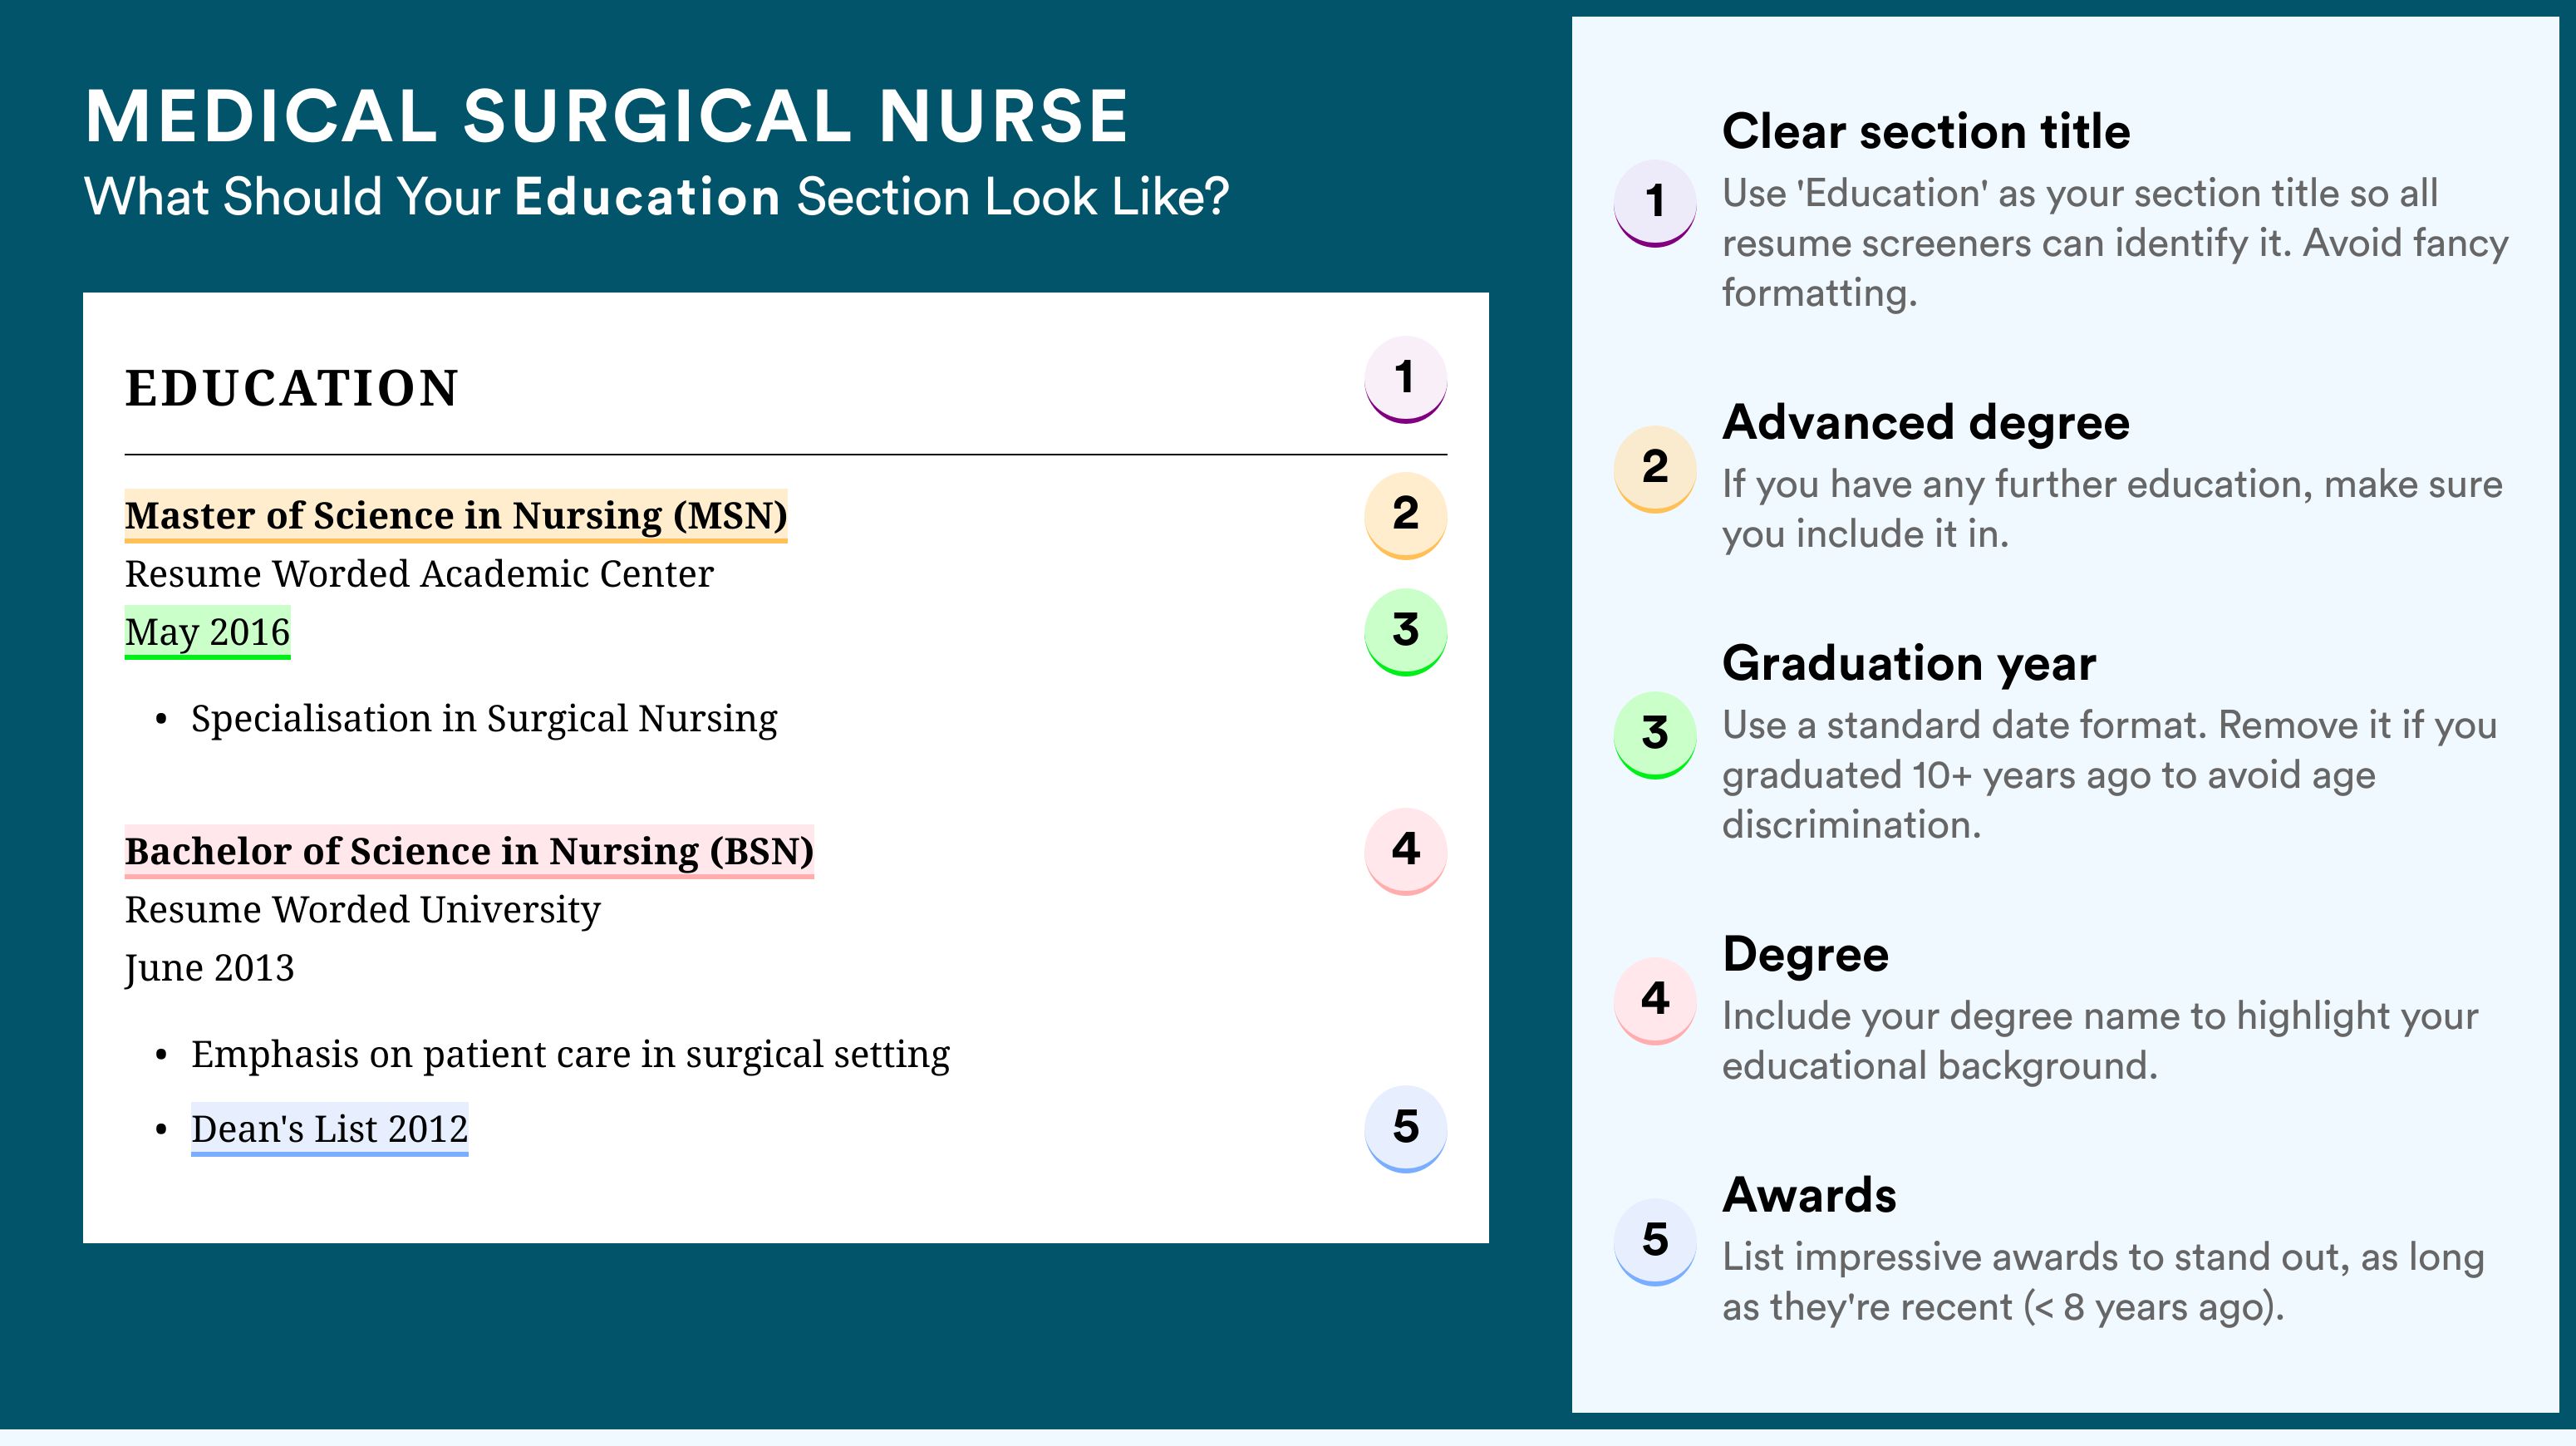 How To Write An Education Section - Medical Surgical Nurse Roles